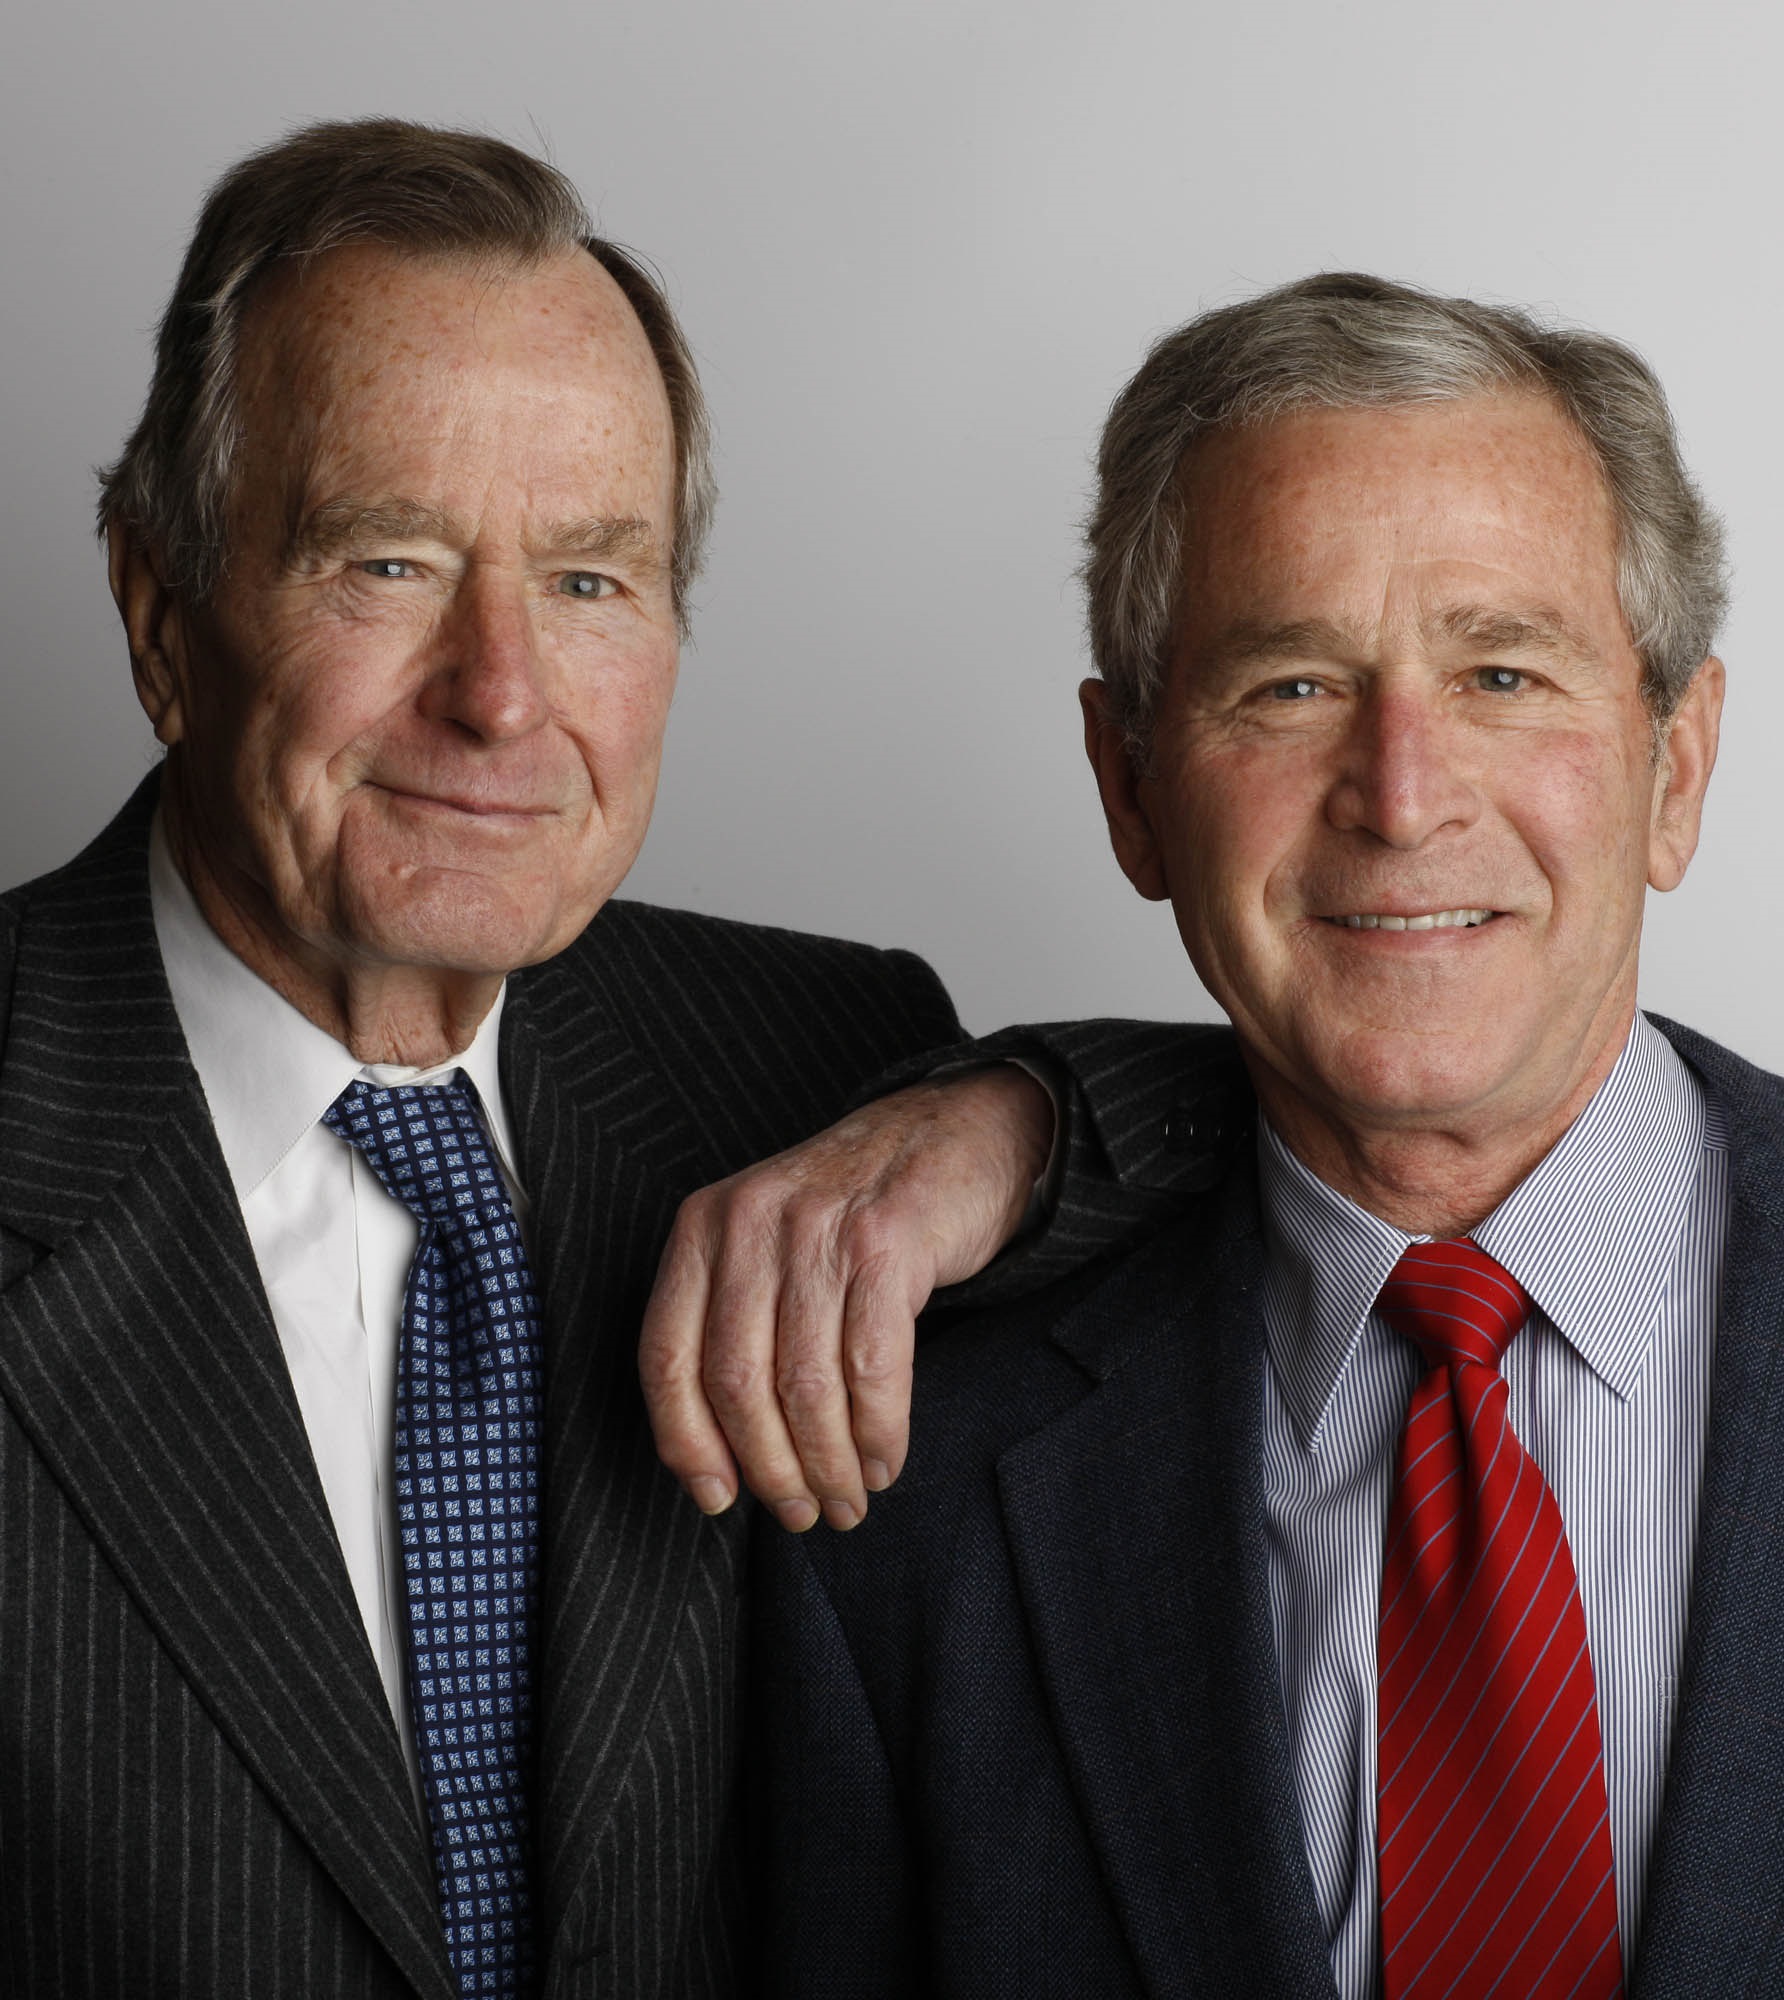 Bush: A son's reflections on his father's legacy